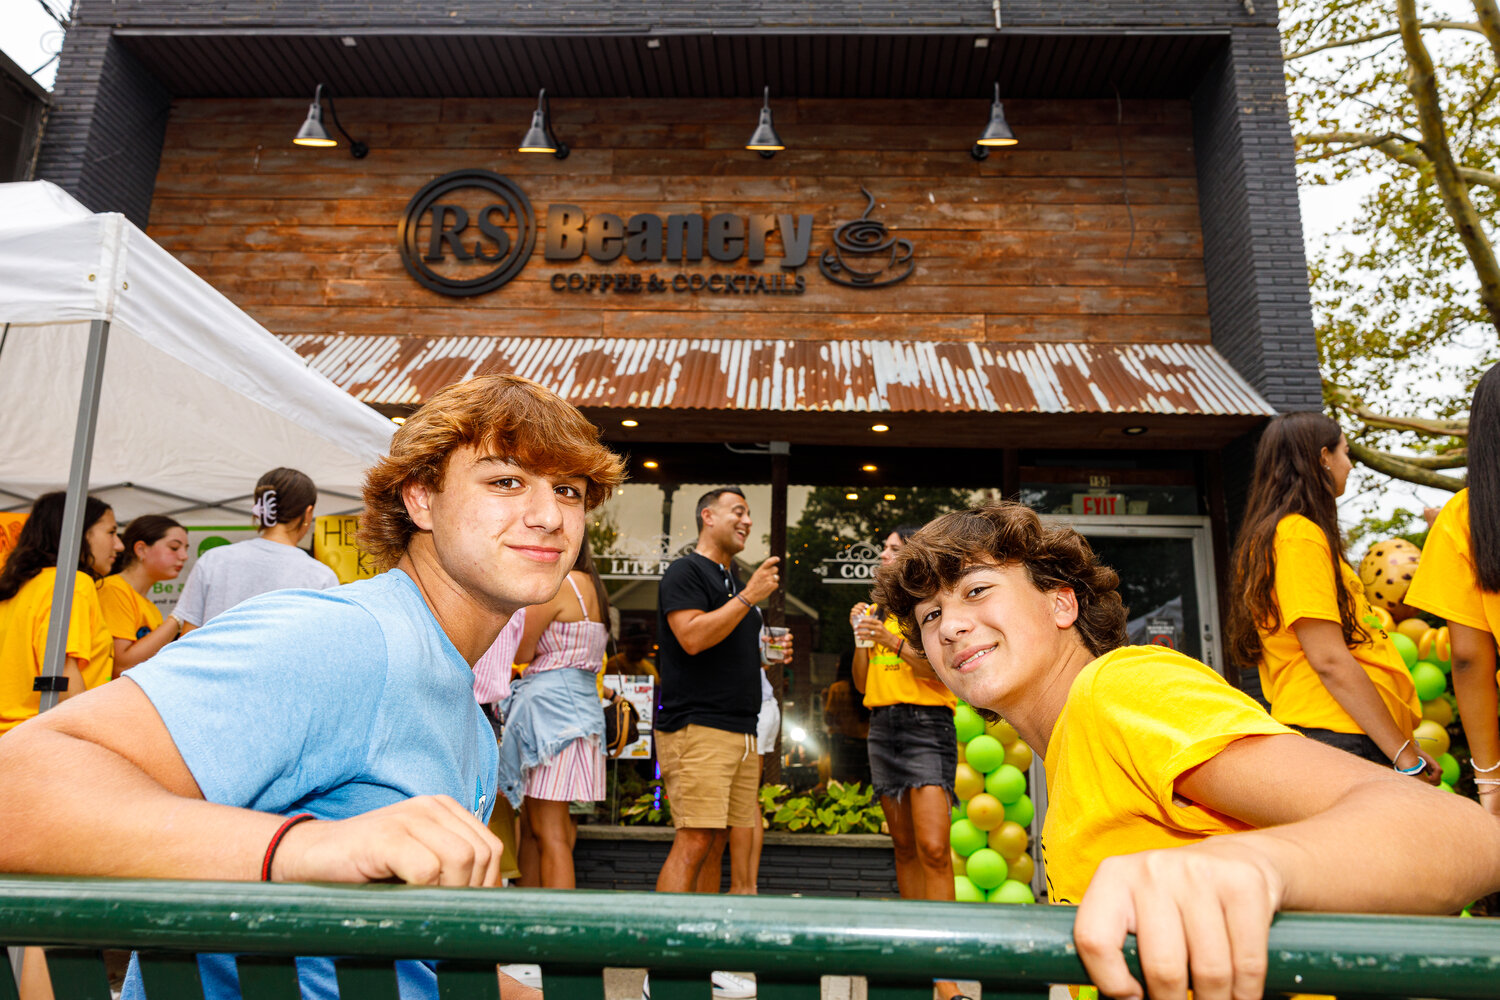 The event attracted people of all ages who knew Capizzi, or just came out to support the cause. Dom Capizzi, 14, and Anthony Schlosser, 13, outside the eatery.